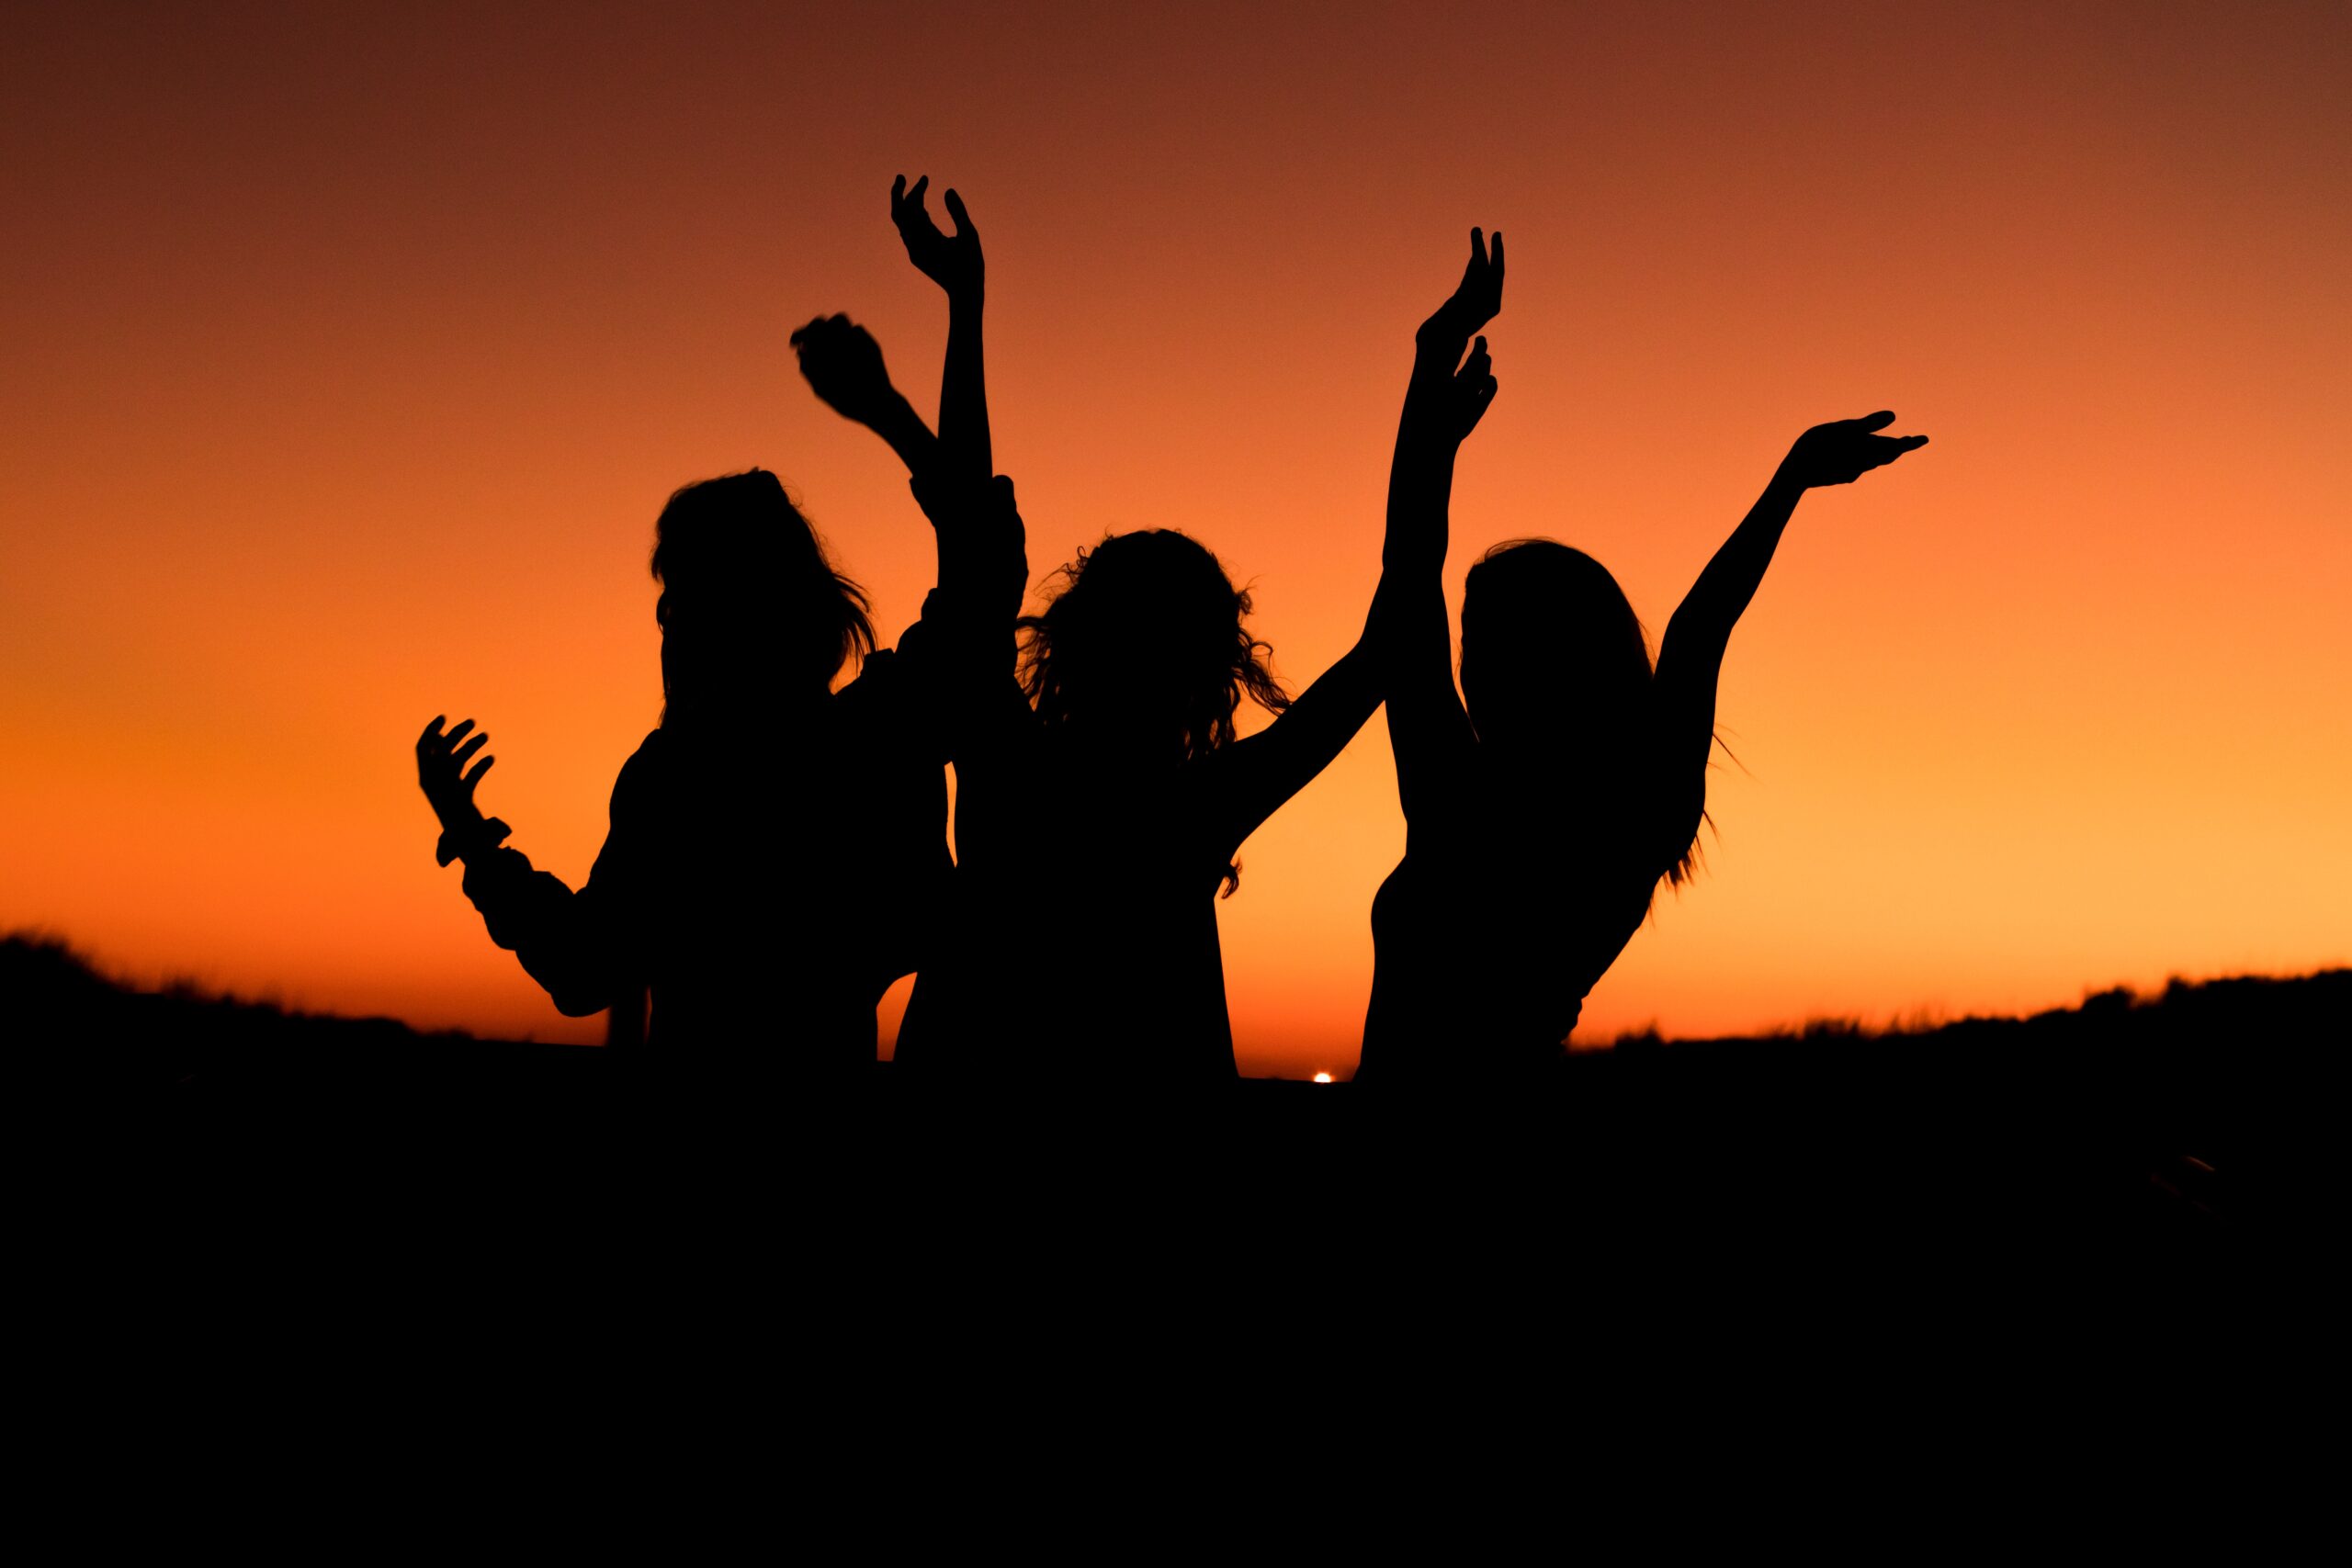 Silhouette of a group of people engaged in hen party activities at sunset.